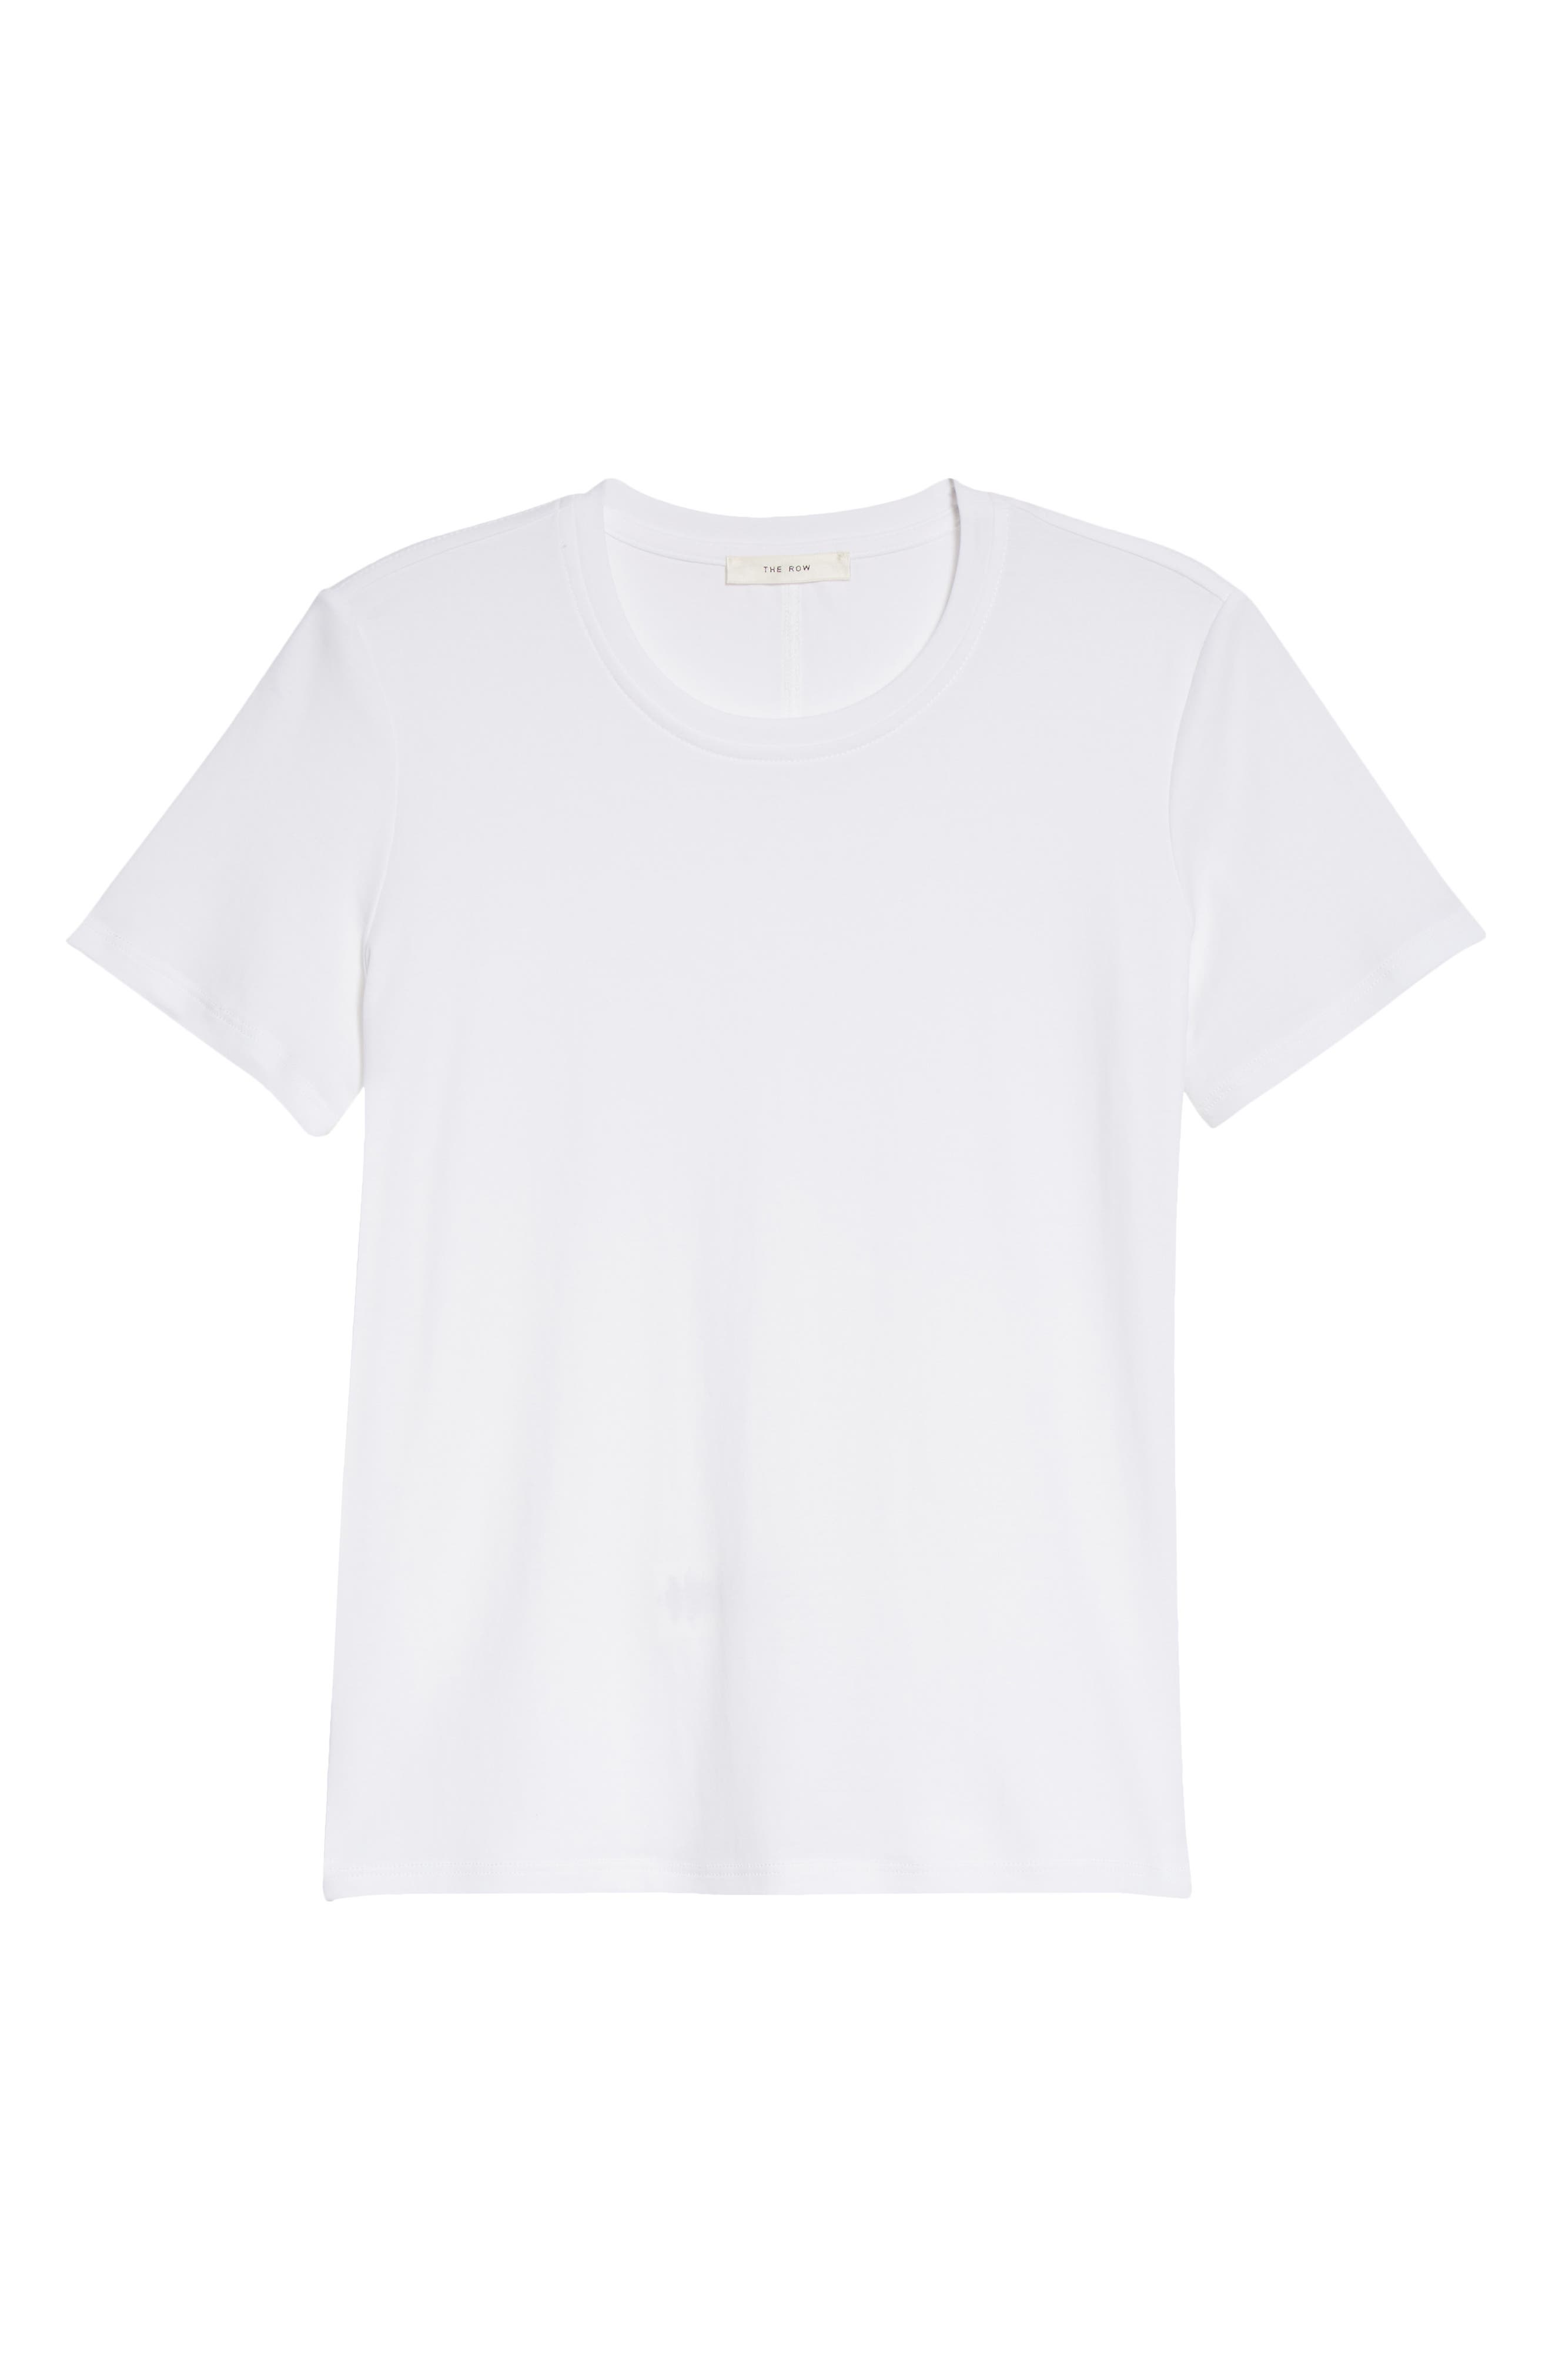 The Row Wesler Cotton Jersey T-Shirt in Bright White at Nordstrom, Size X-Large